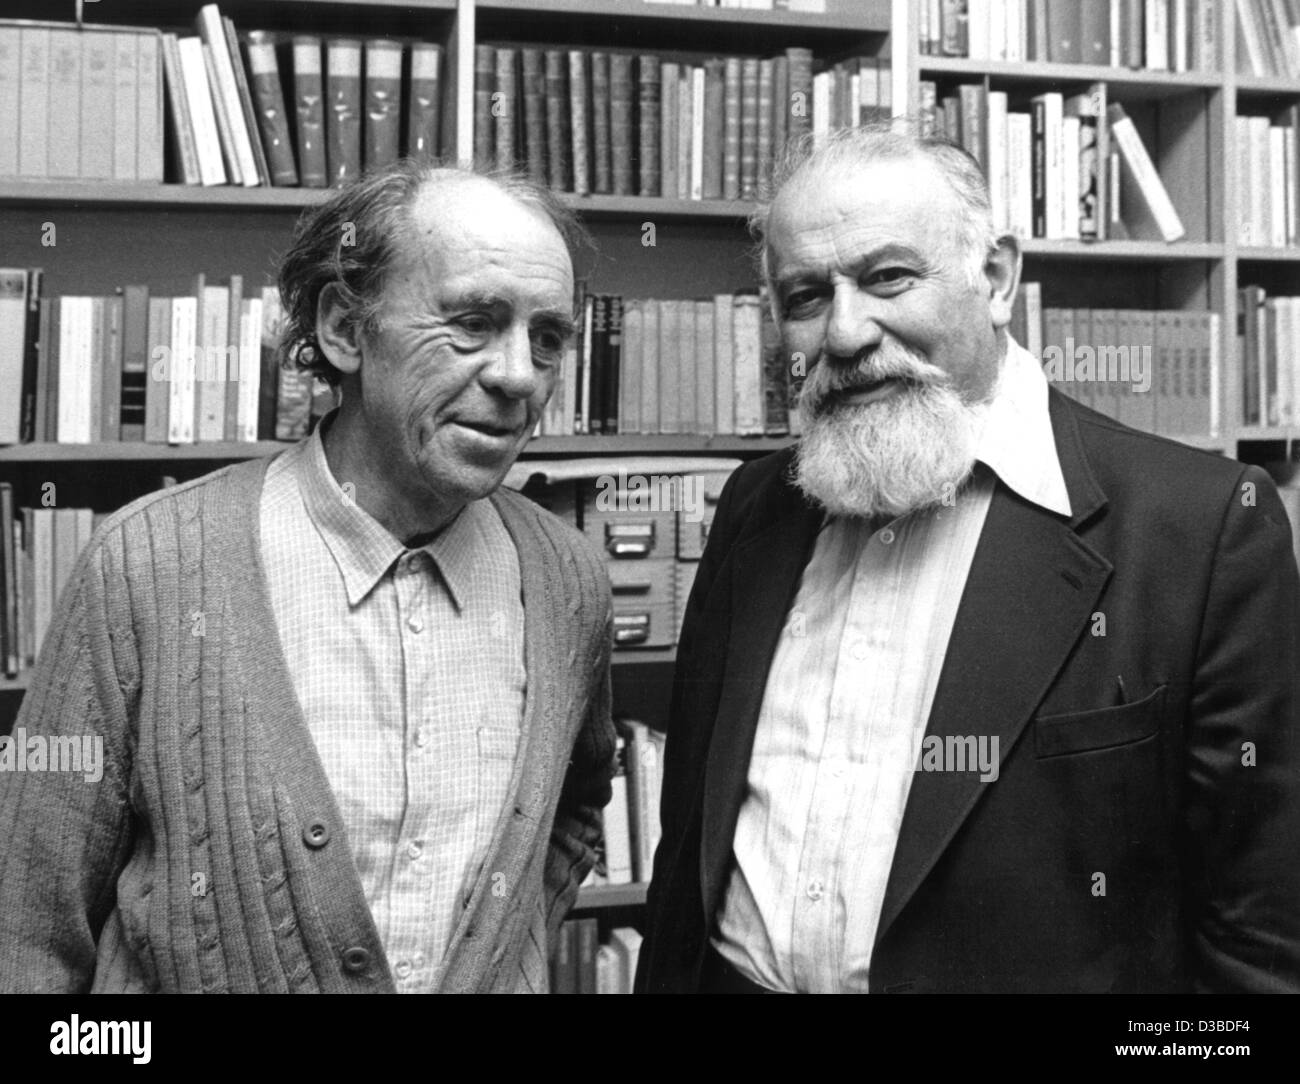 (dpa files) - German author Heinrich Boell (L) pictured with expatriated Russian writer Lev Kopelev in Cologne, West Germany, 12 November 1980. Boell was born 21 December 1917 in Cologne and died 16 July 1972 in Langenbroich, West Germany. In 1962 he received the Buechner Award and in 1972 the Noble Stock Photo